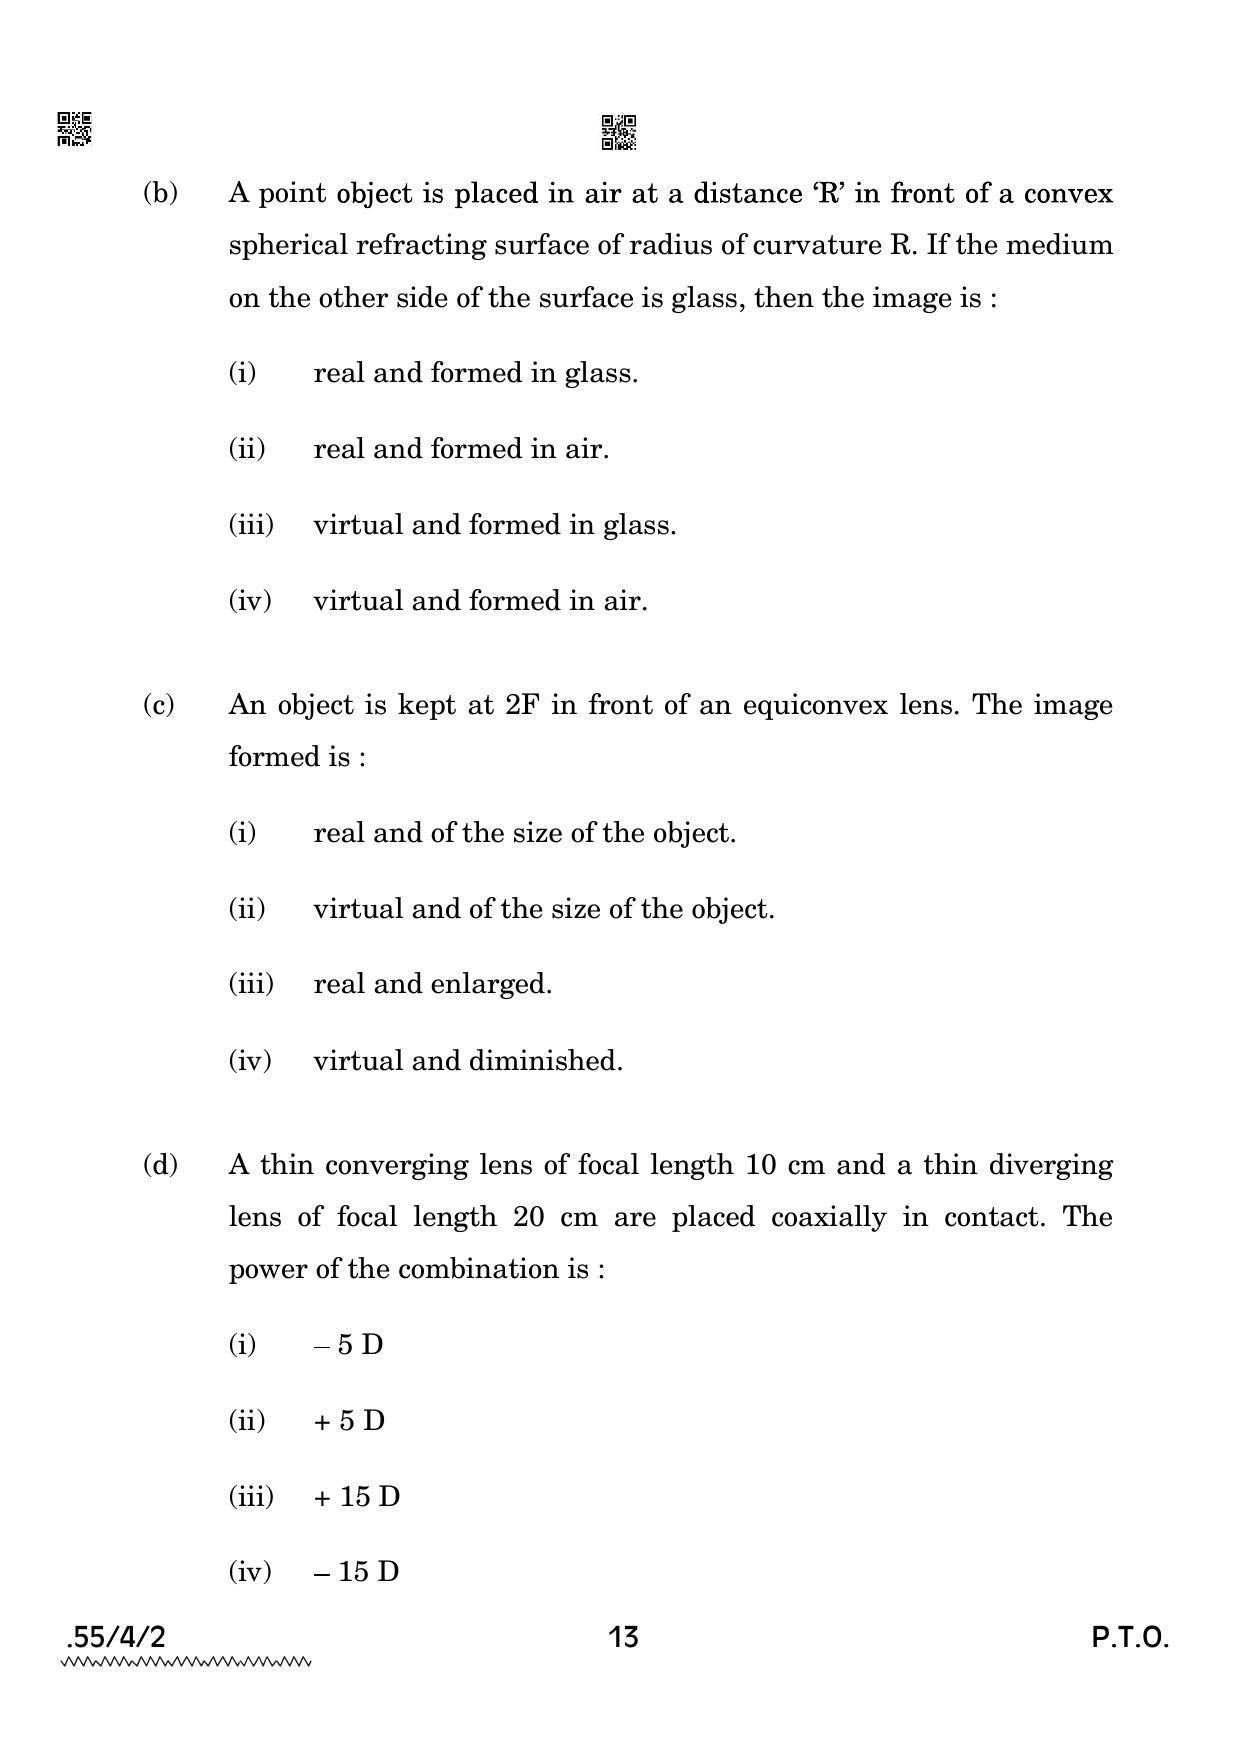 CBSE Class 12 55-4-2 Physics 2022 Question Paper - Page 13